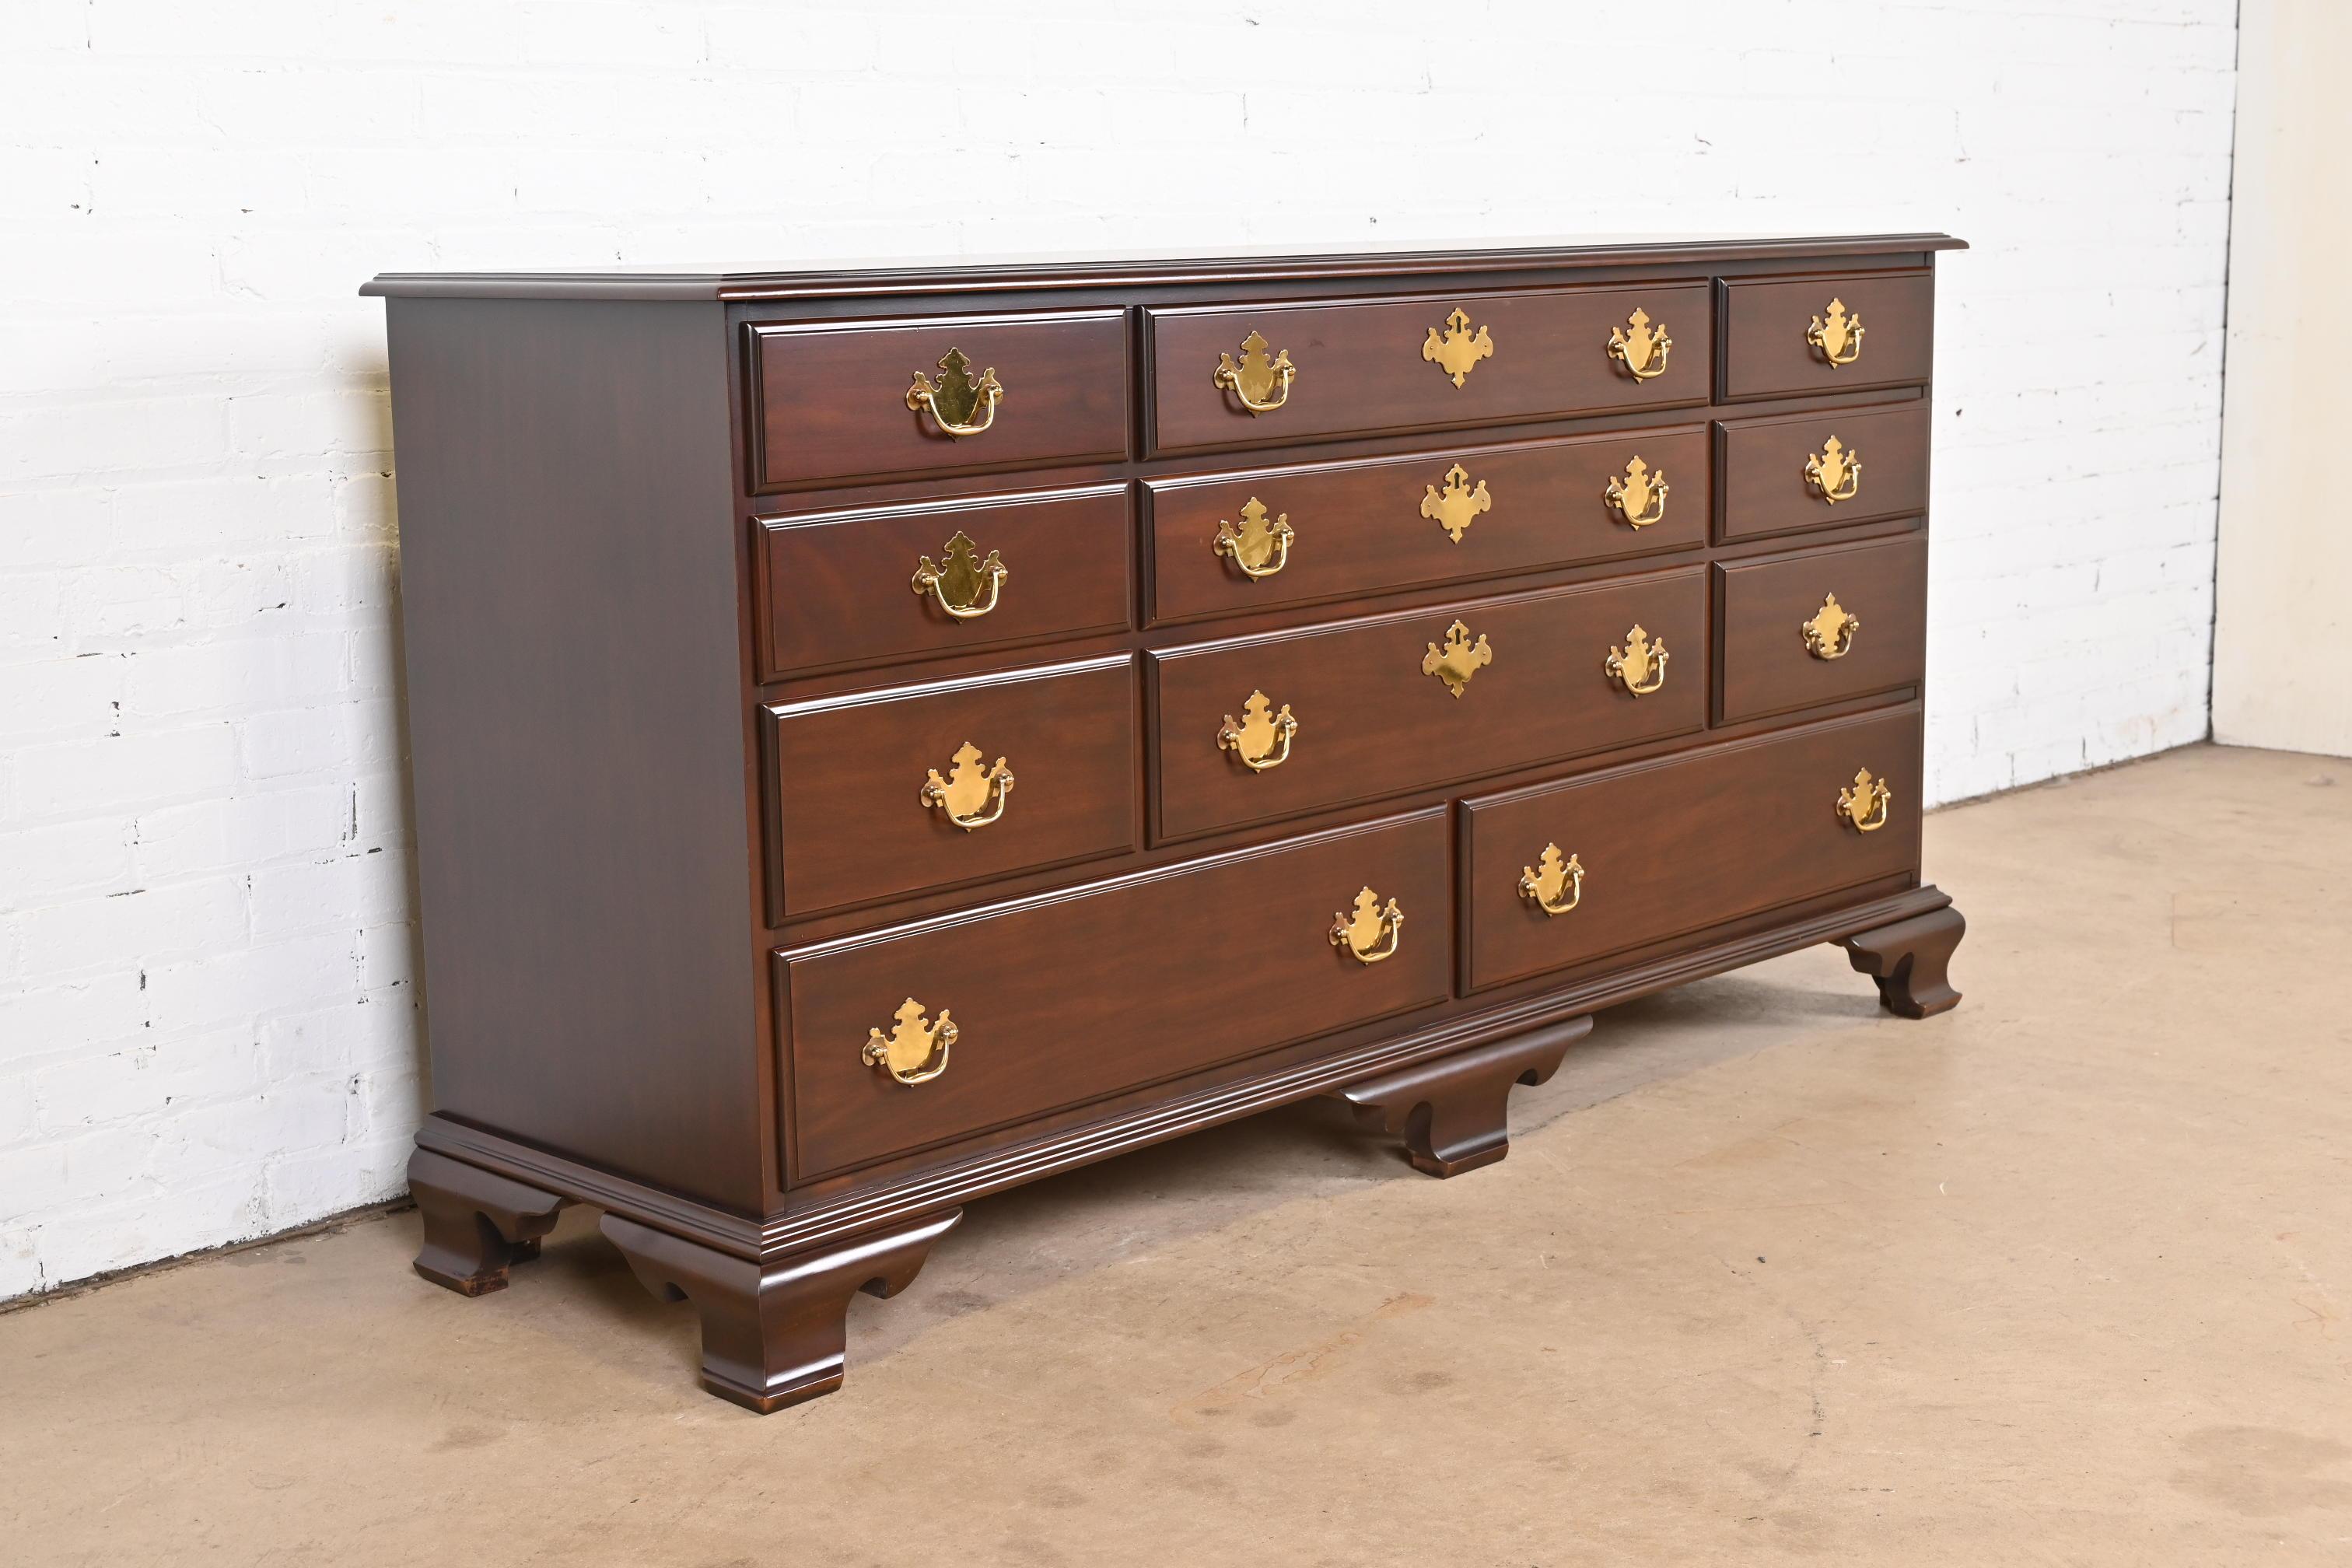 American Harden Furniture Georgian Carved Solid Cherry Wood Long Dresser, Newly Restored For Sale